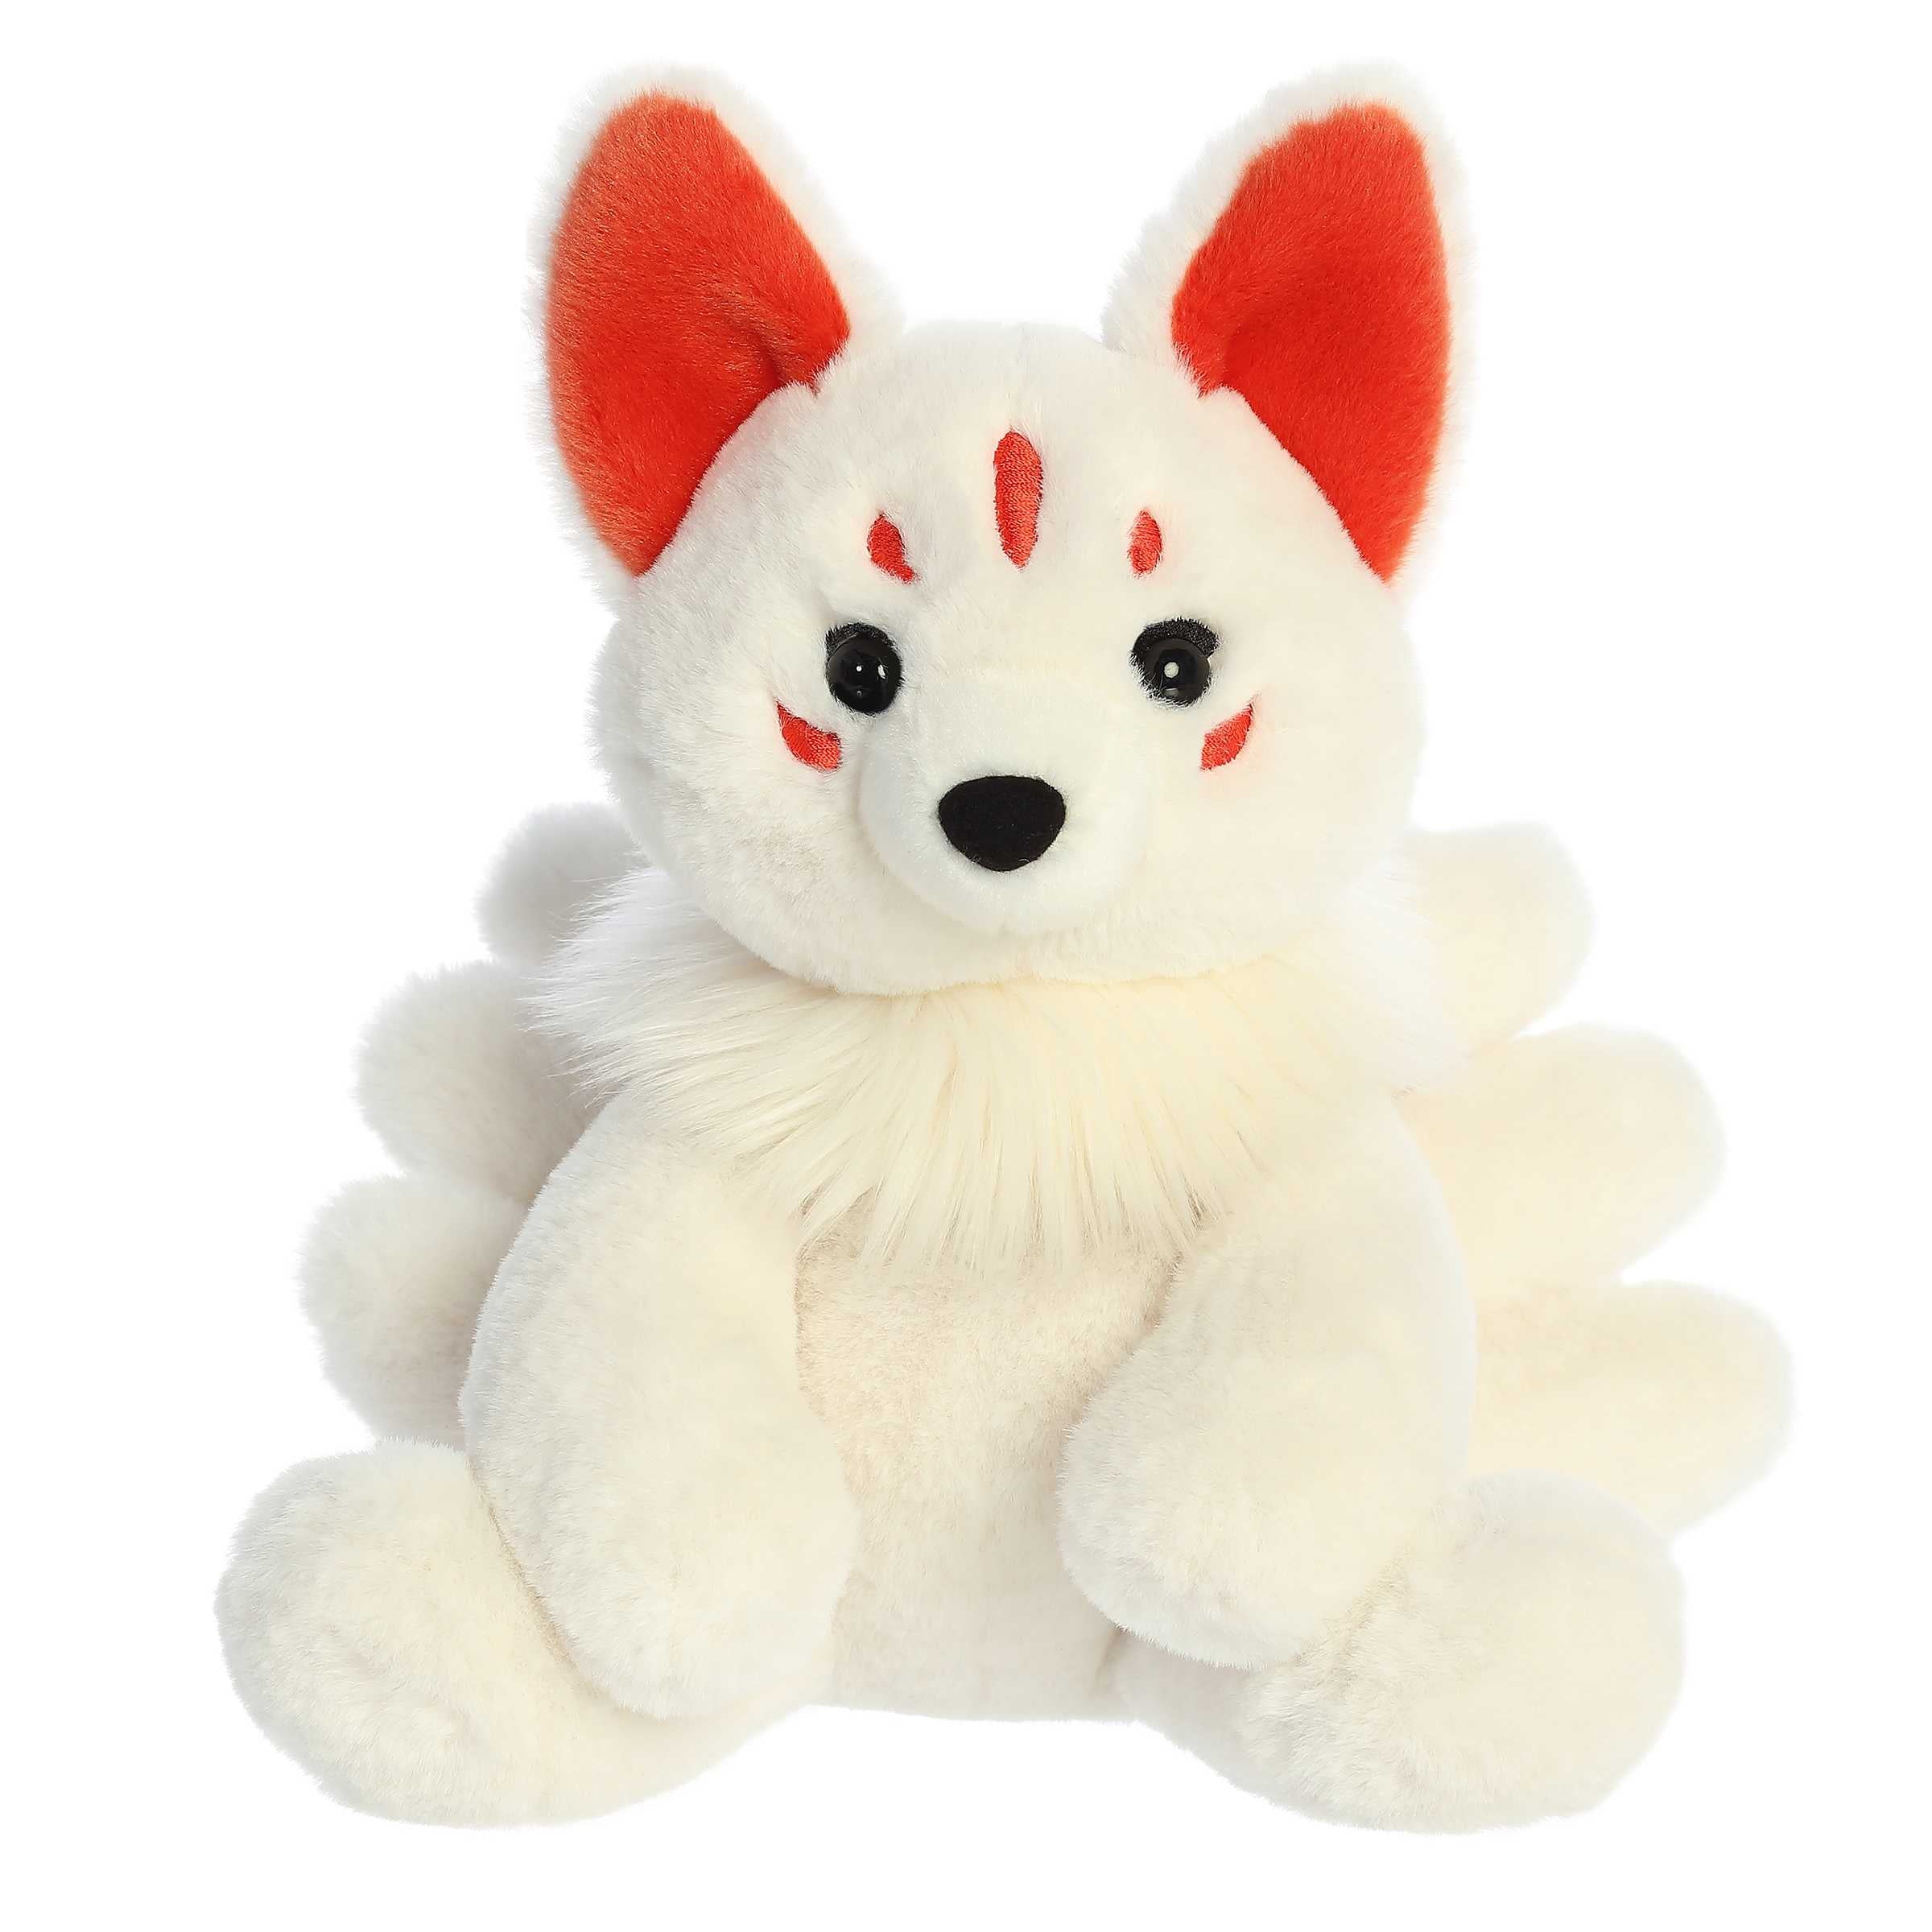 Kitsune plush, a mystical nine-tailed fox with white fur and vivid red markings, enchanting folklore allure!